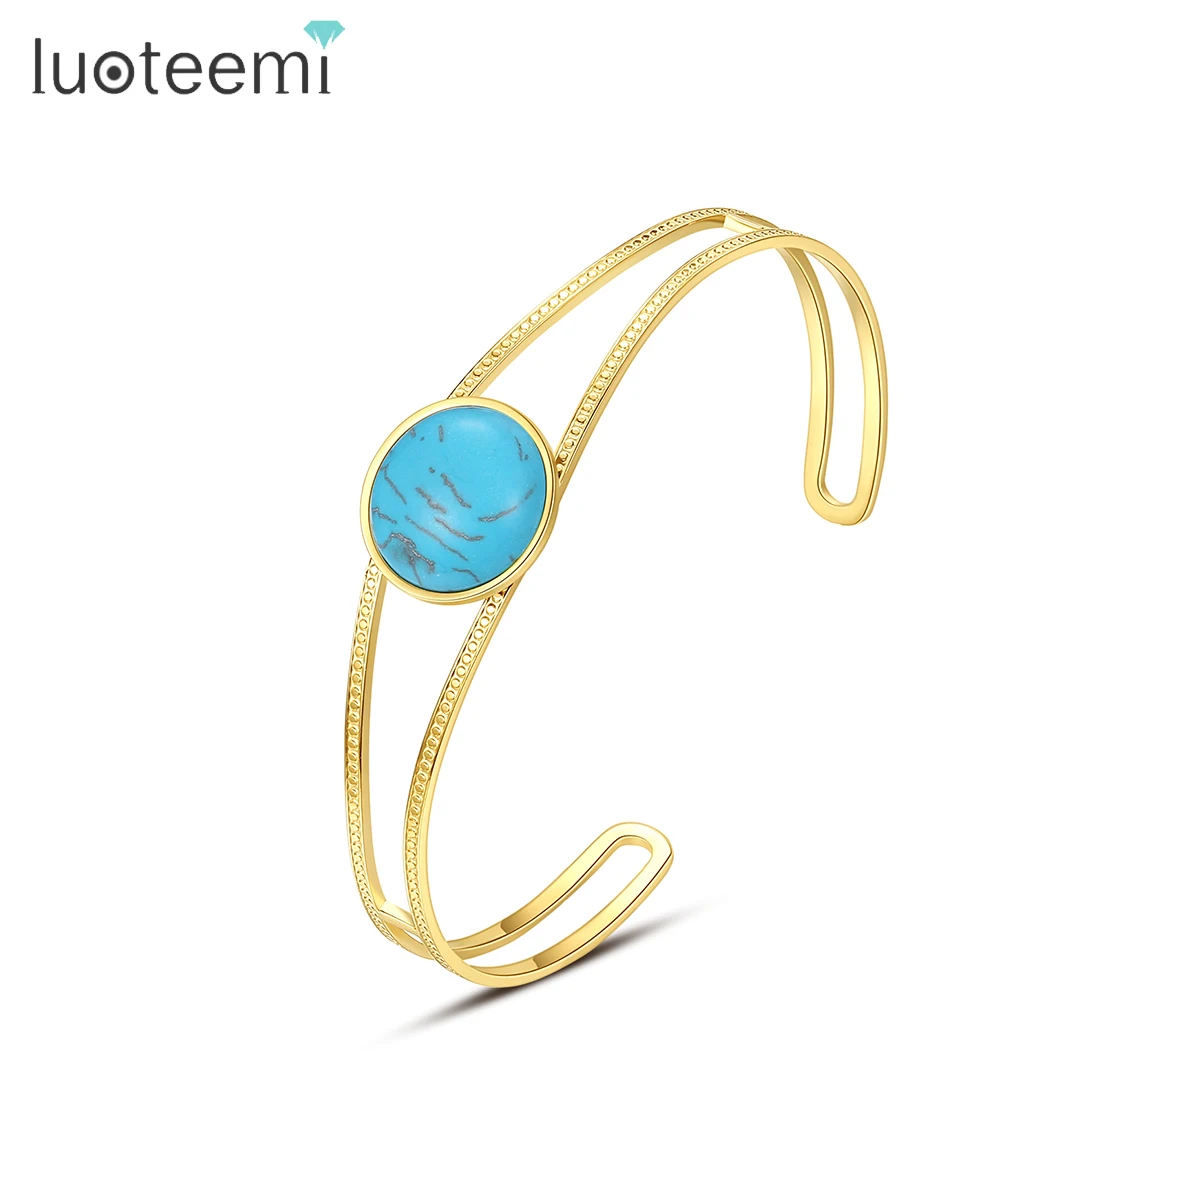 

SP-LAM Round Turquoise Open Cuff Bangle Metal Jewelry Designer Charm Gold Plated Manufacturer Bracelet Stainless Steel